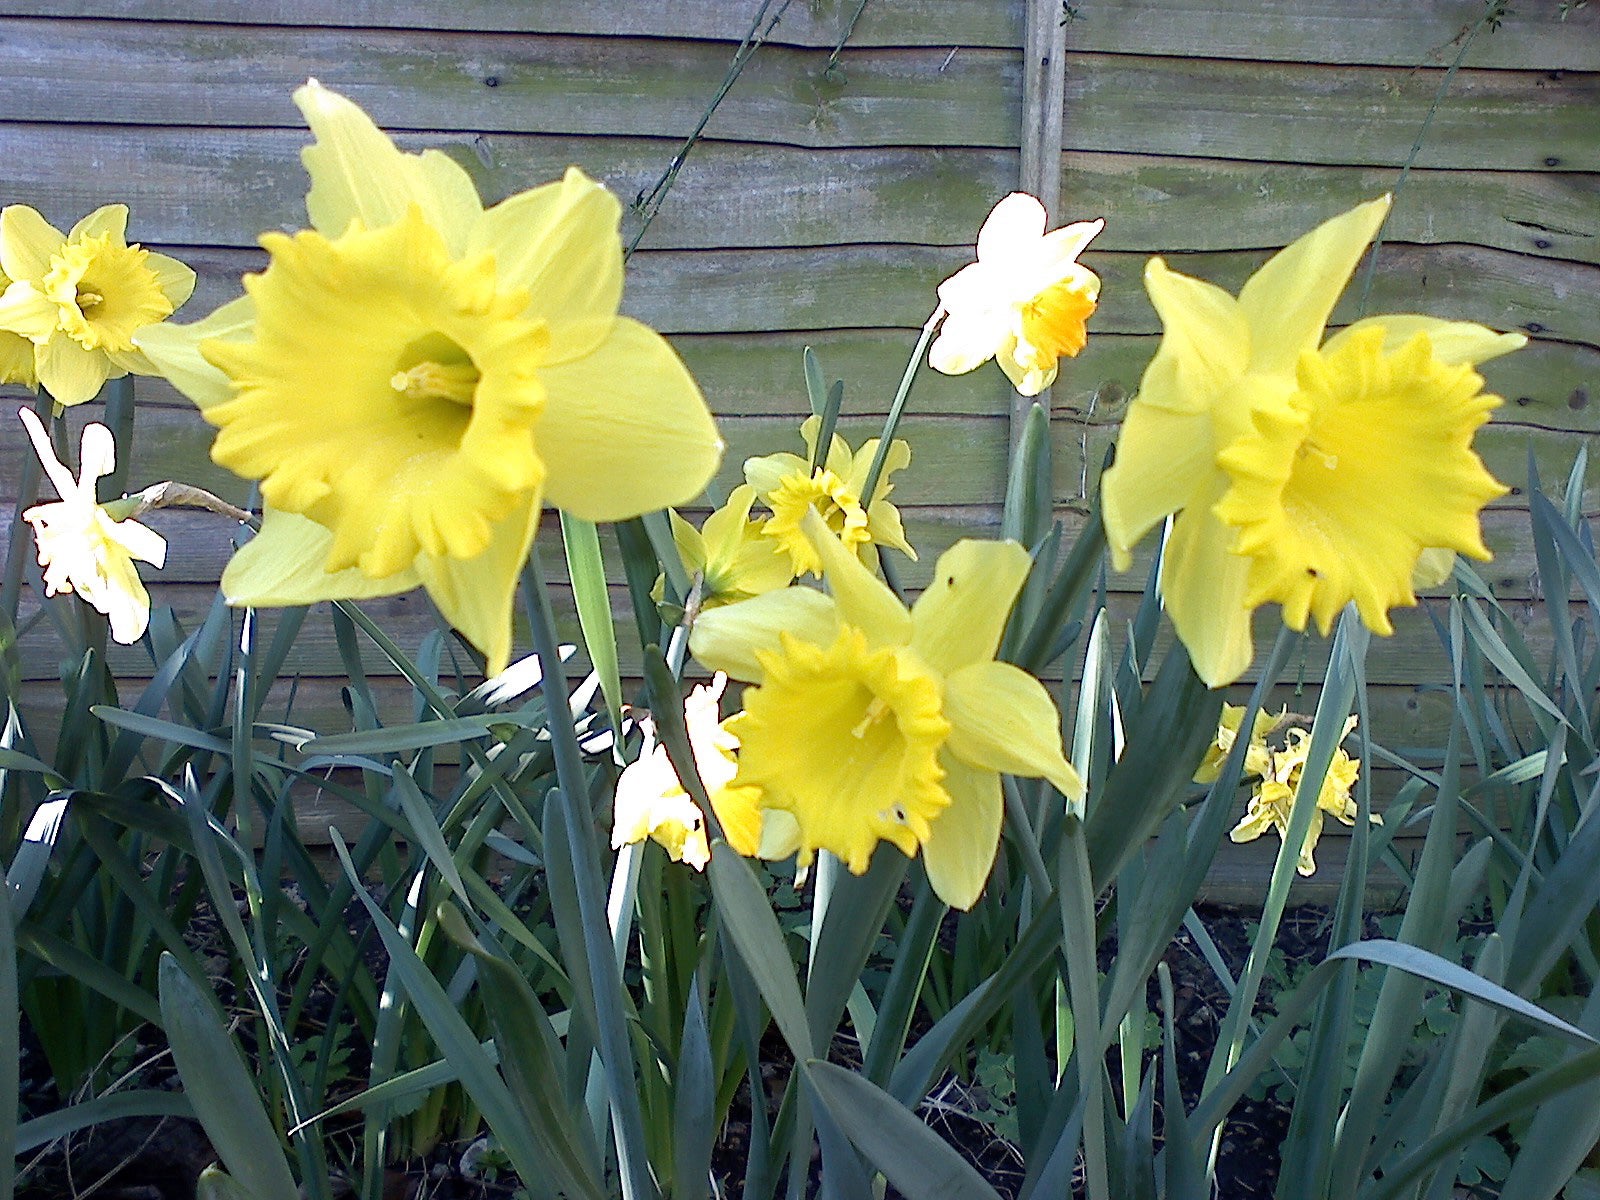 The image does not relate to an LG U830 HSDPA phone or its product review, but instead shows a group of yellow daffodils in bloom with green foliage in front of a wooden fence.